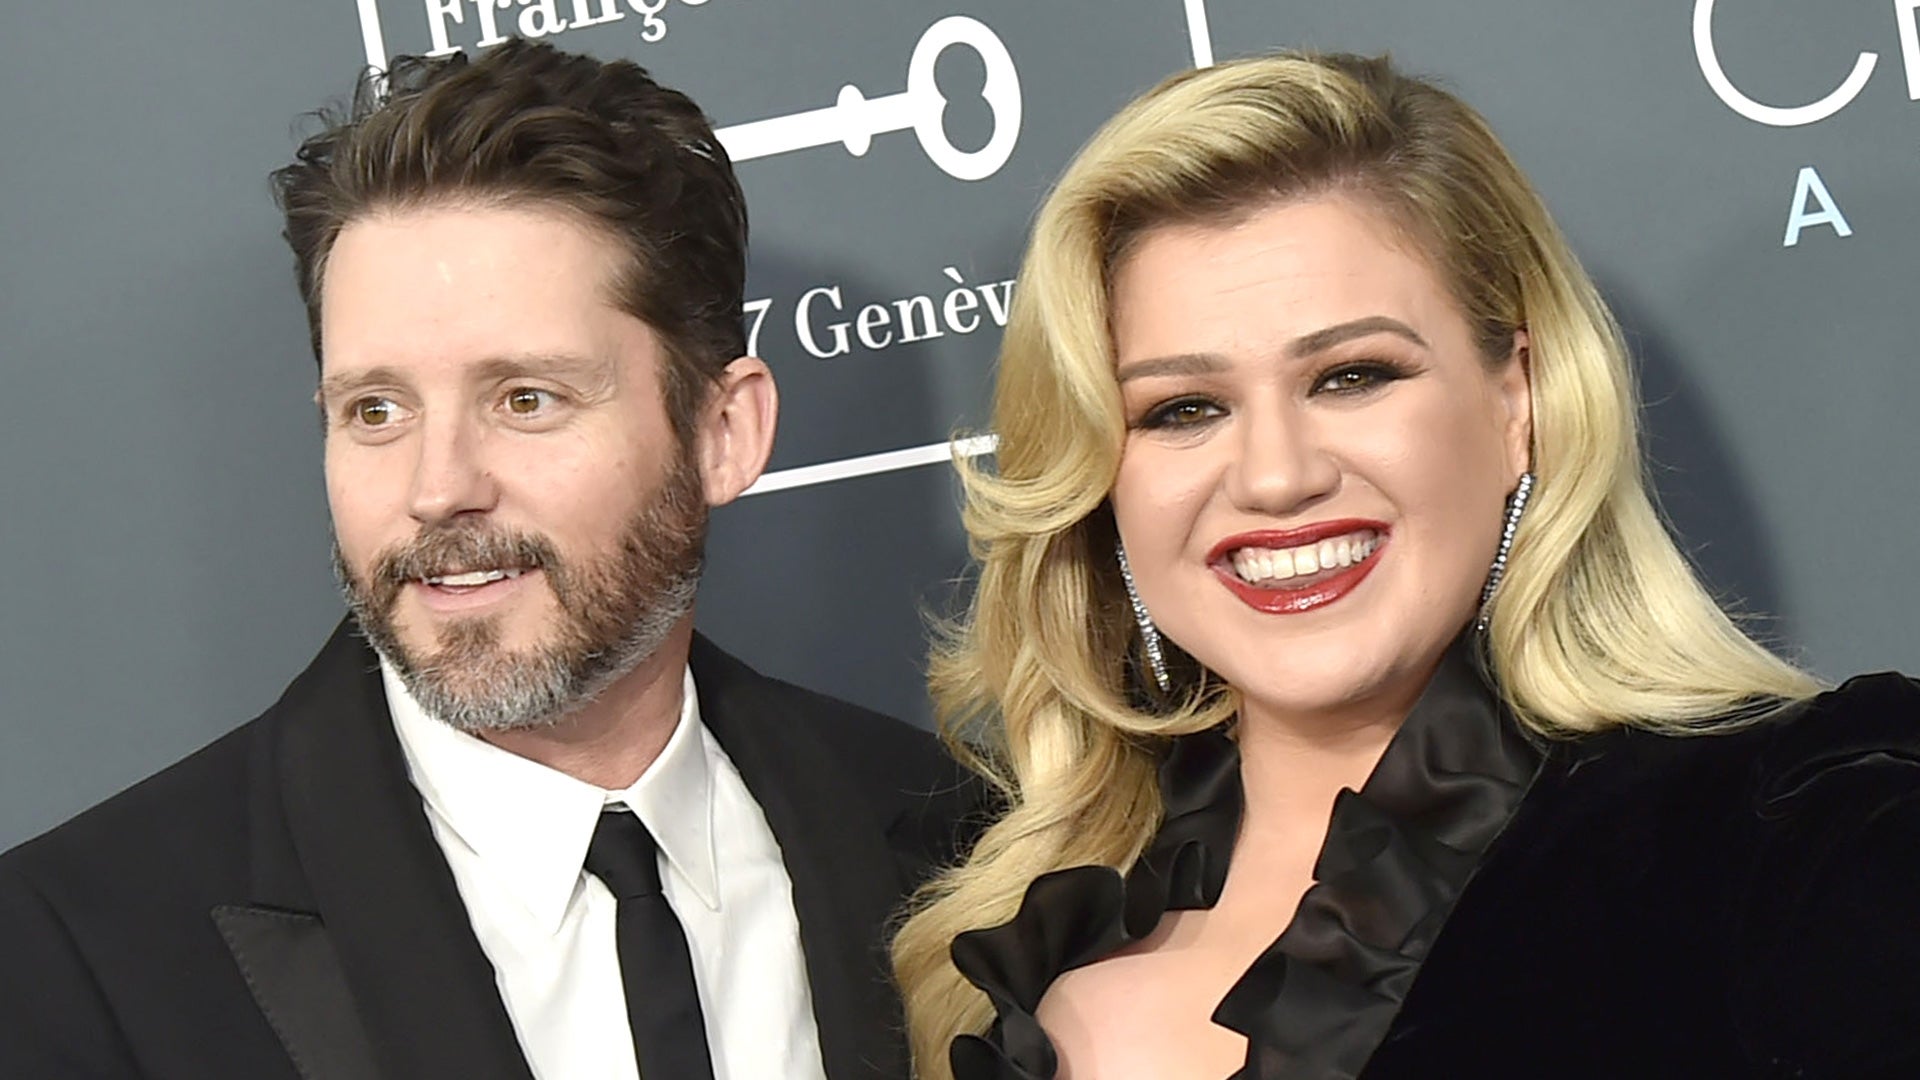 Kelly Clarkson Explains Why She’s Delayed Releasing New Music After Divorce